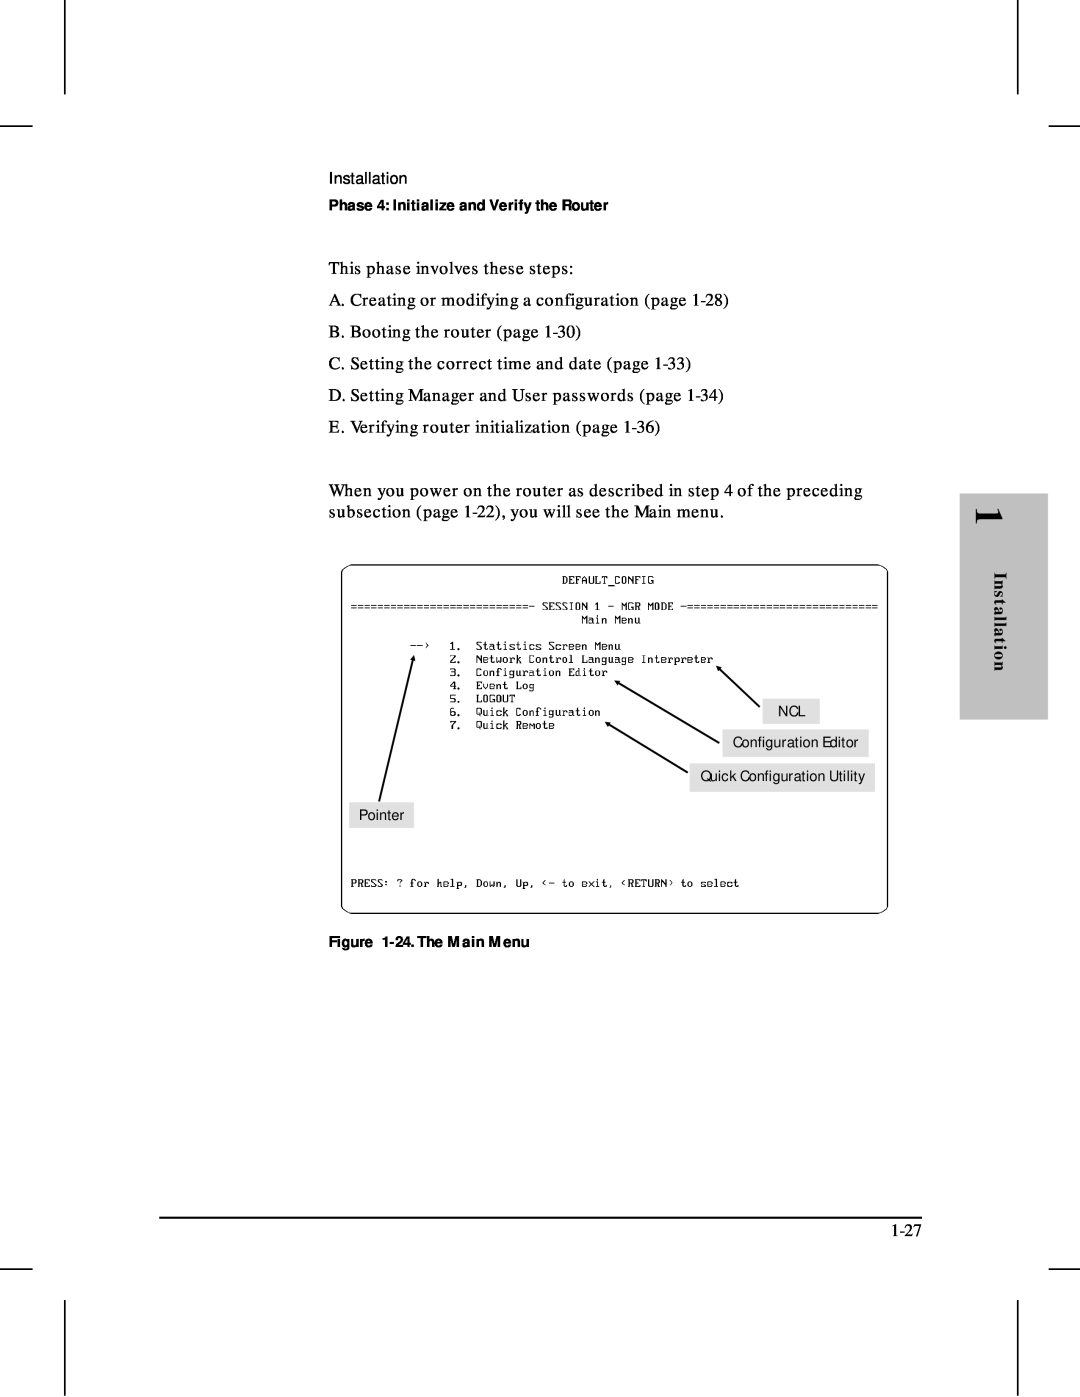 HP 480 manual Phase 4 Initialize and Verify the Router, This phase involves these steps, 24. The Main Menu 